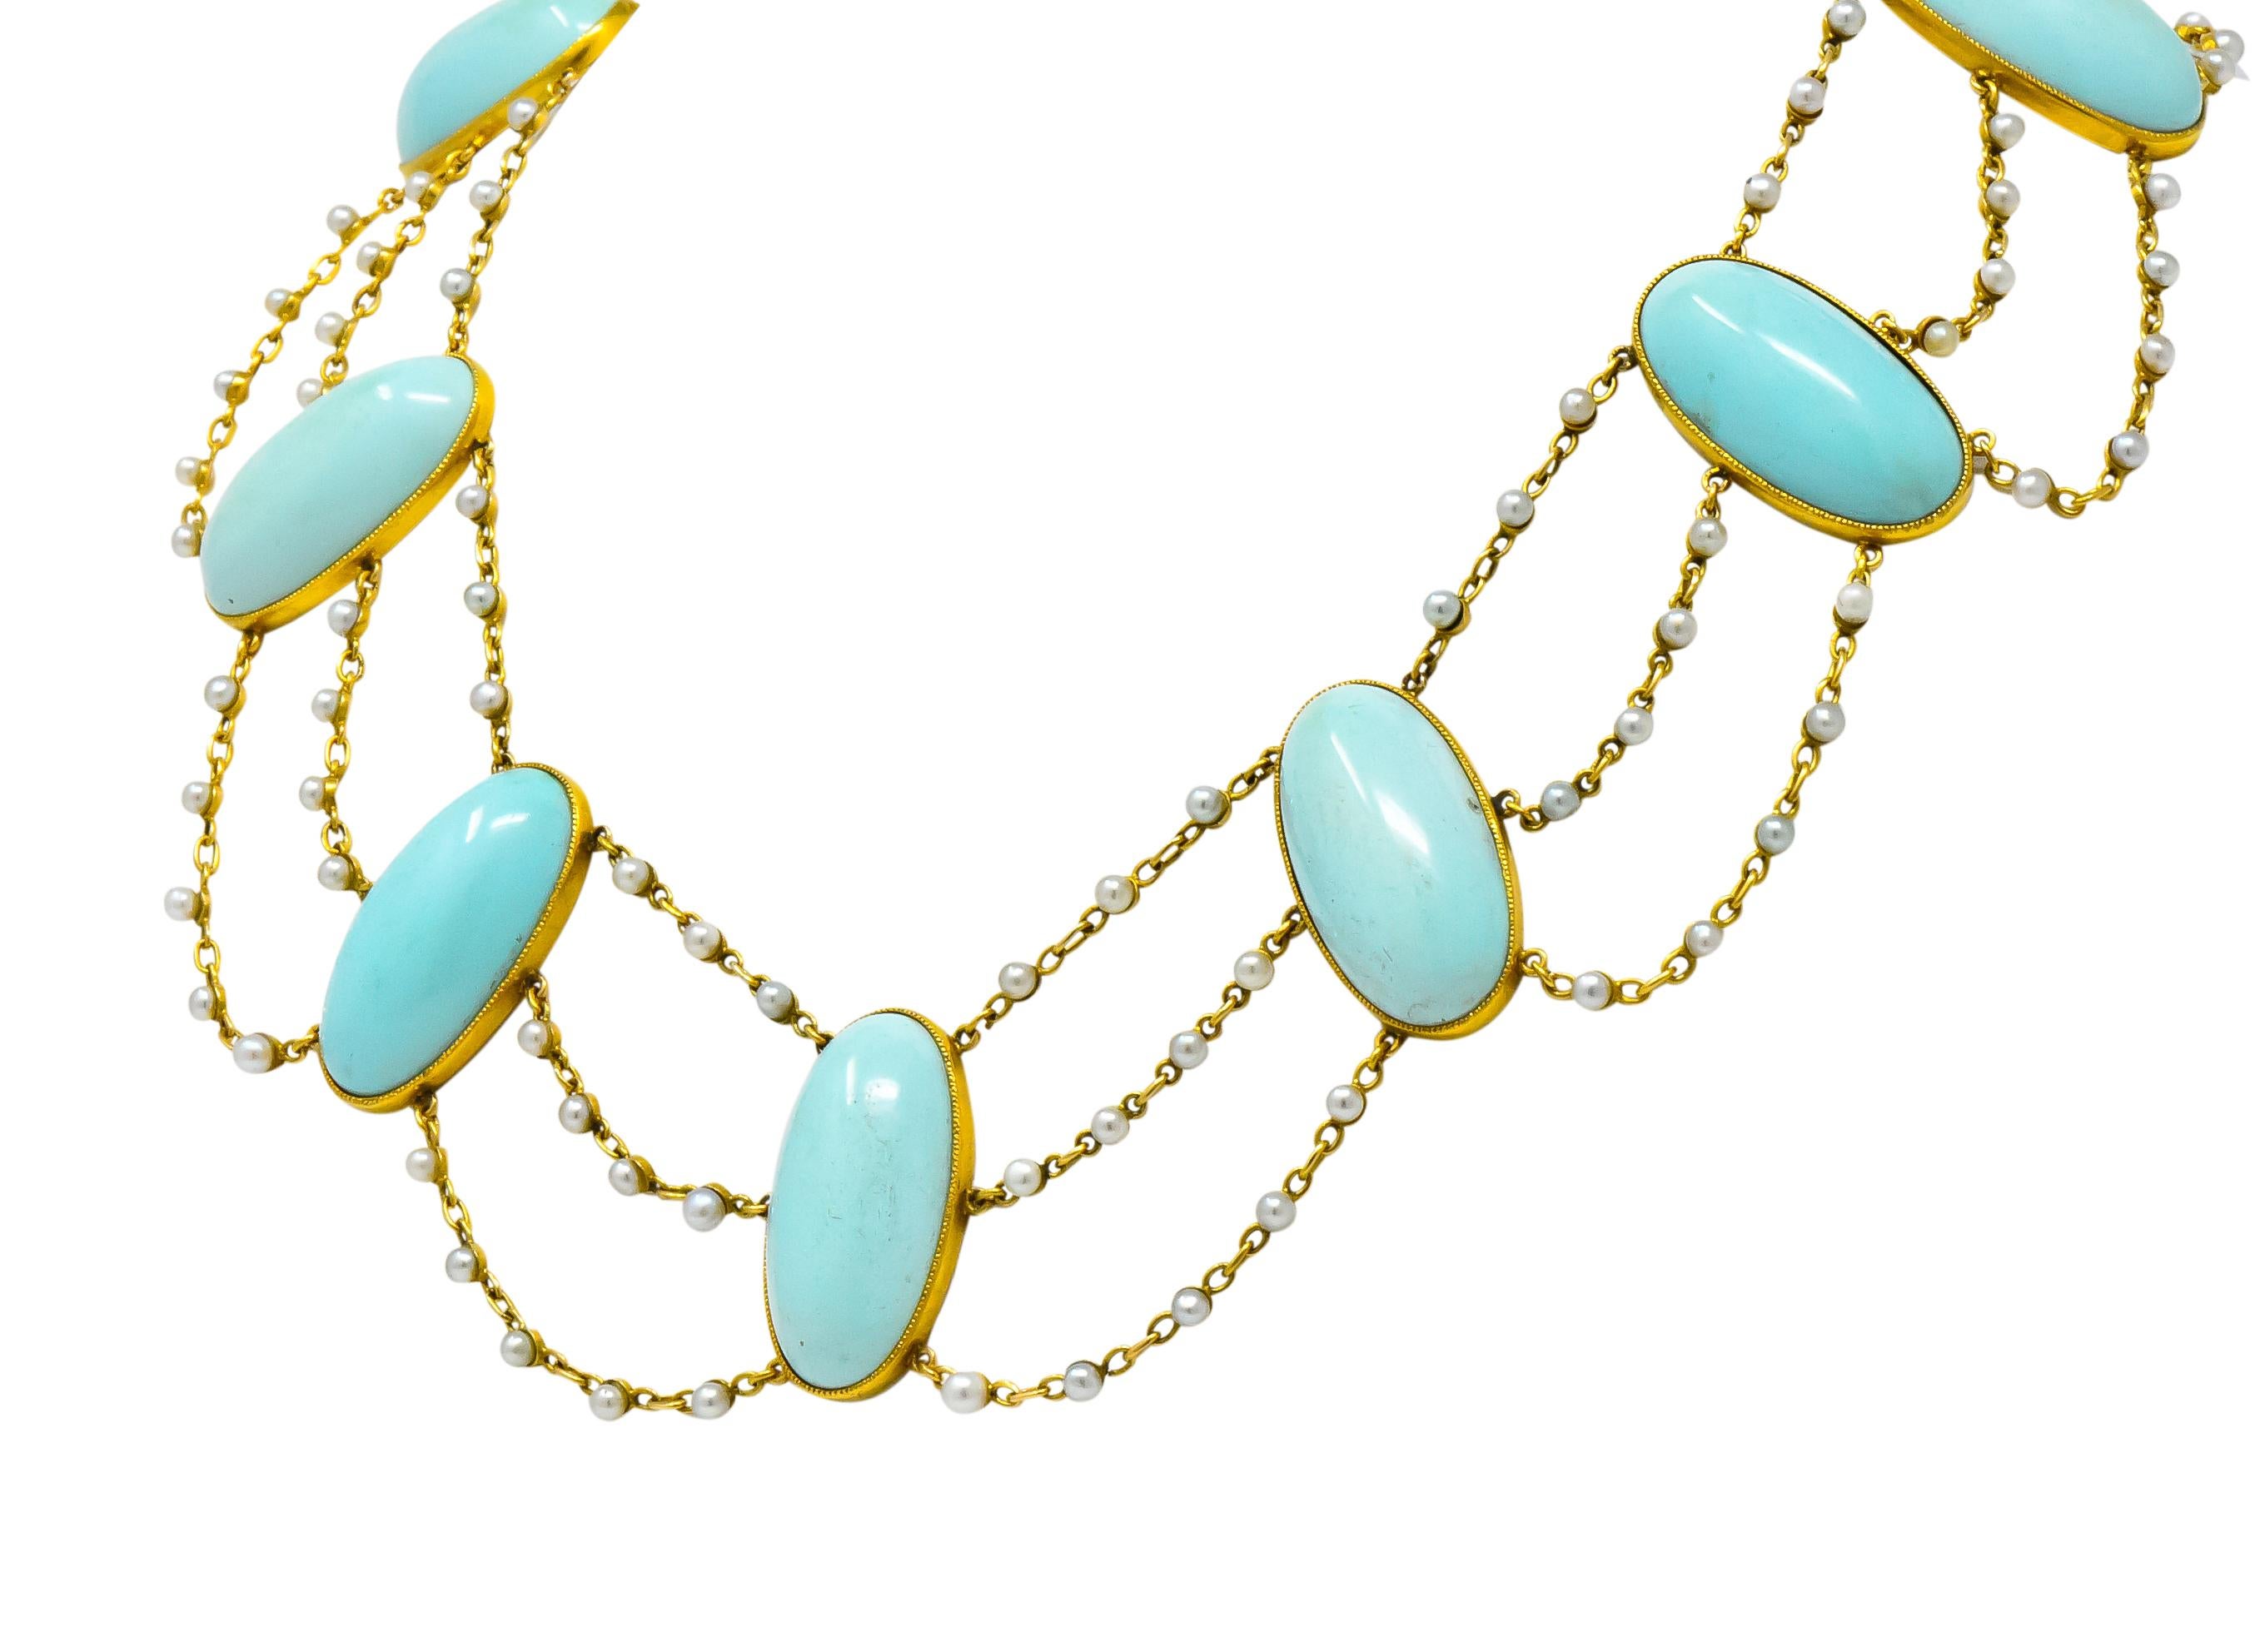 Draping swag motif with ten elongated oval cabochon turquoise stations

Turquoise measuring approximately 28.0 x 13.7 mm, bright soft green blue, matched and bezel set in millegrain gold

Each turquoise connected by three cable style chains set with